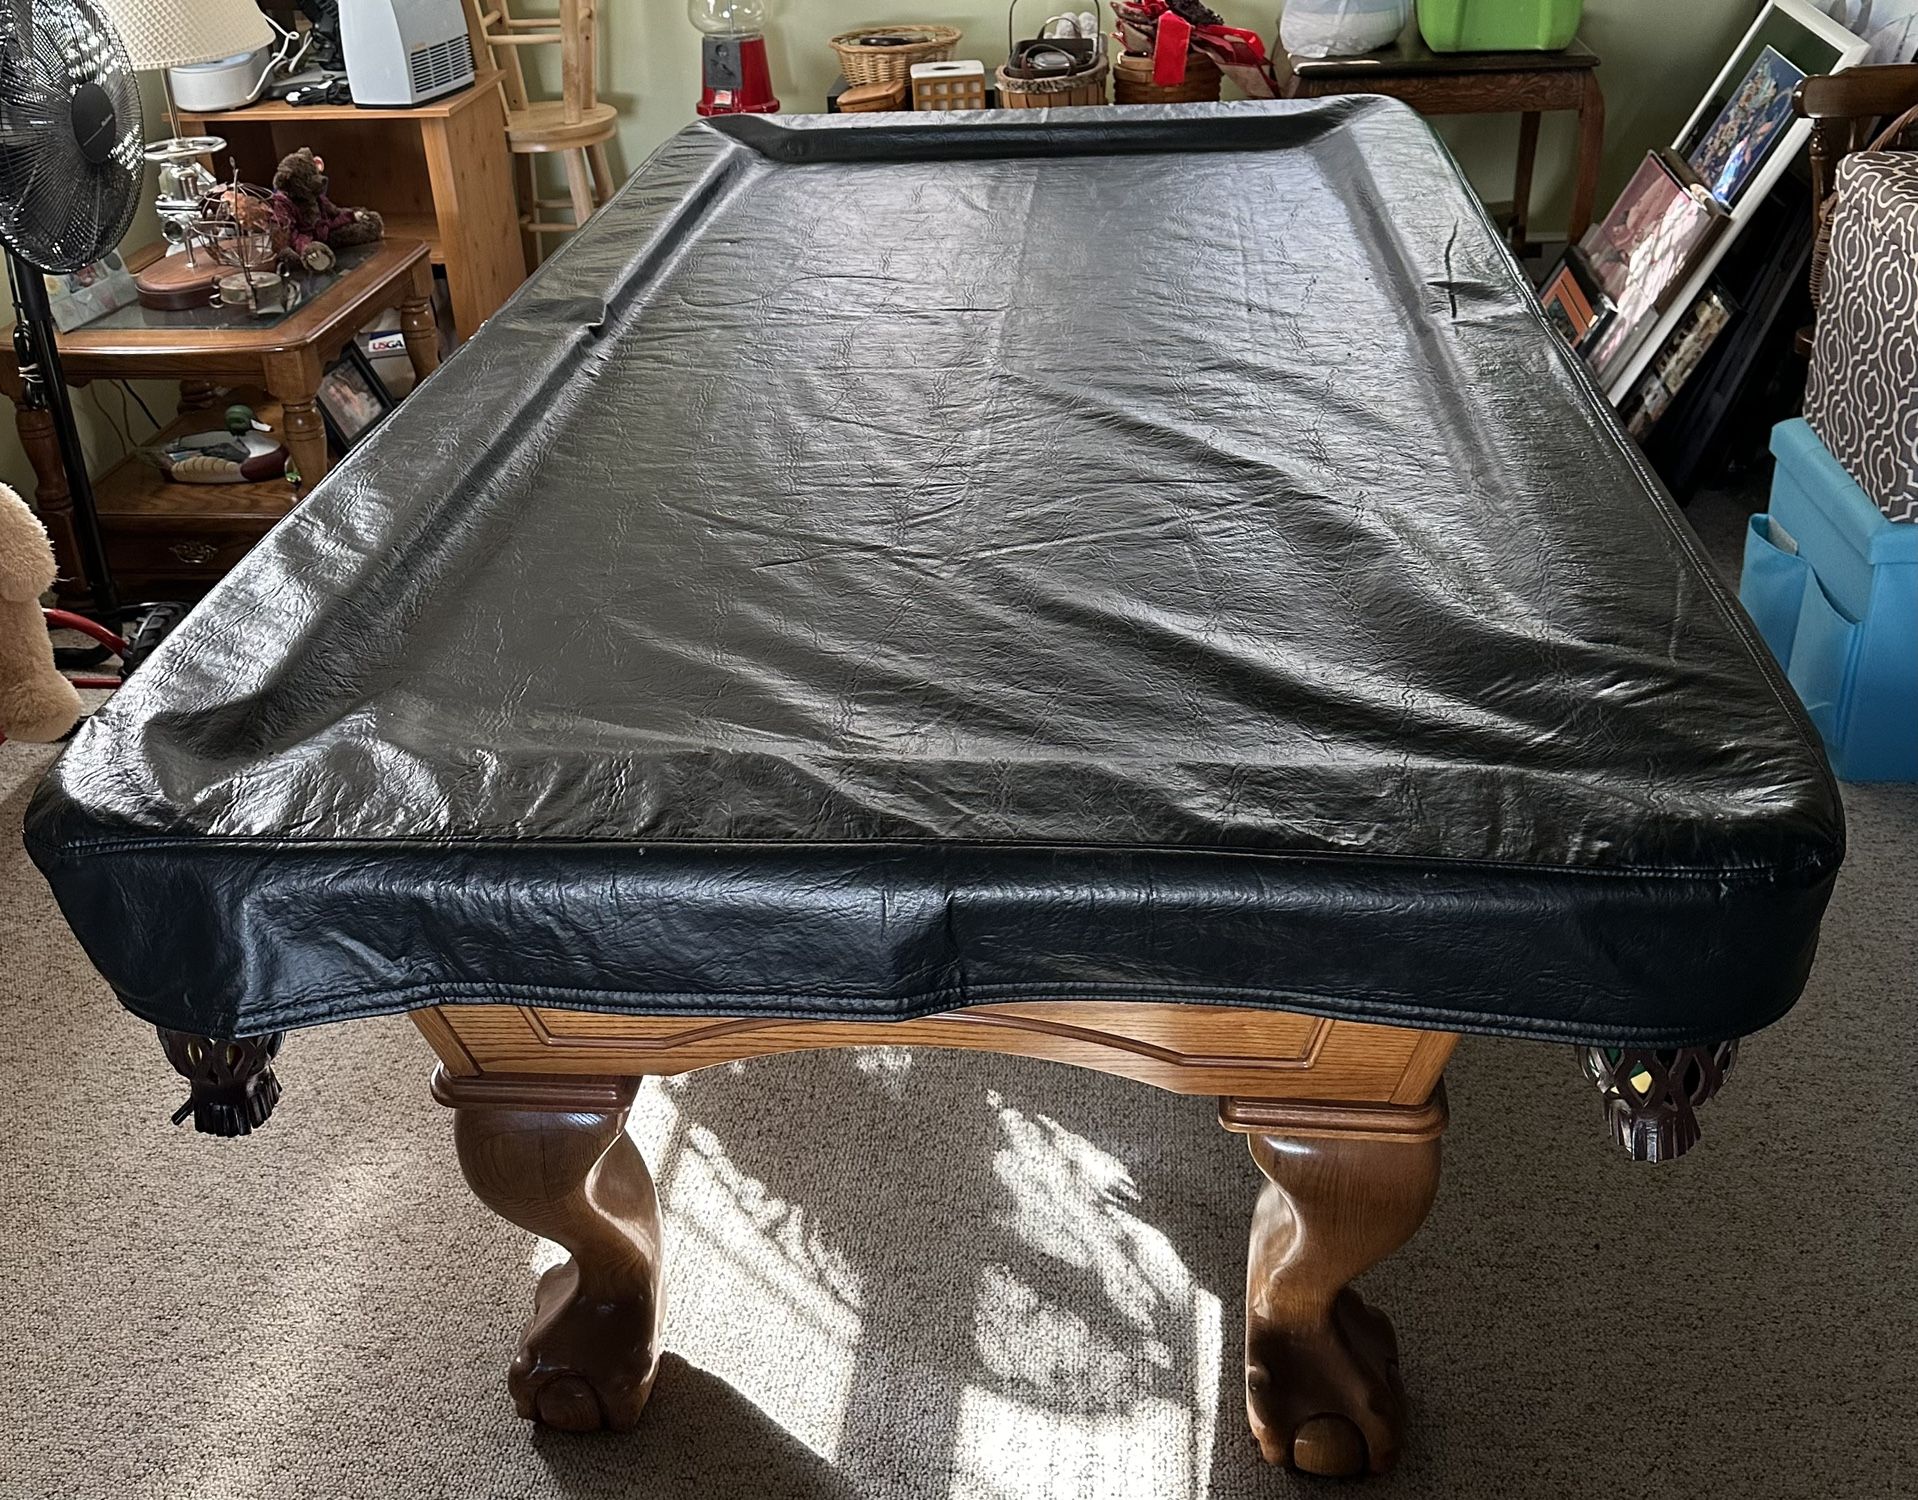 Beautiful Mint Condition 7’ Pool Table REDUCED!!!!